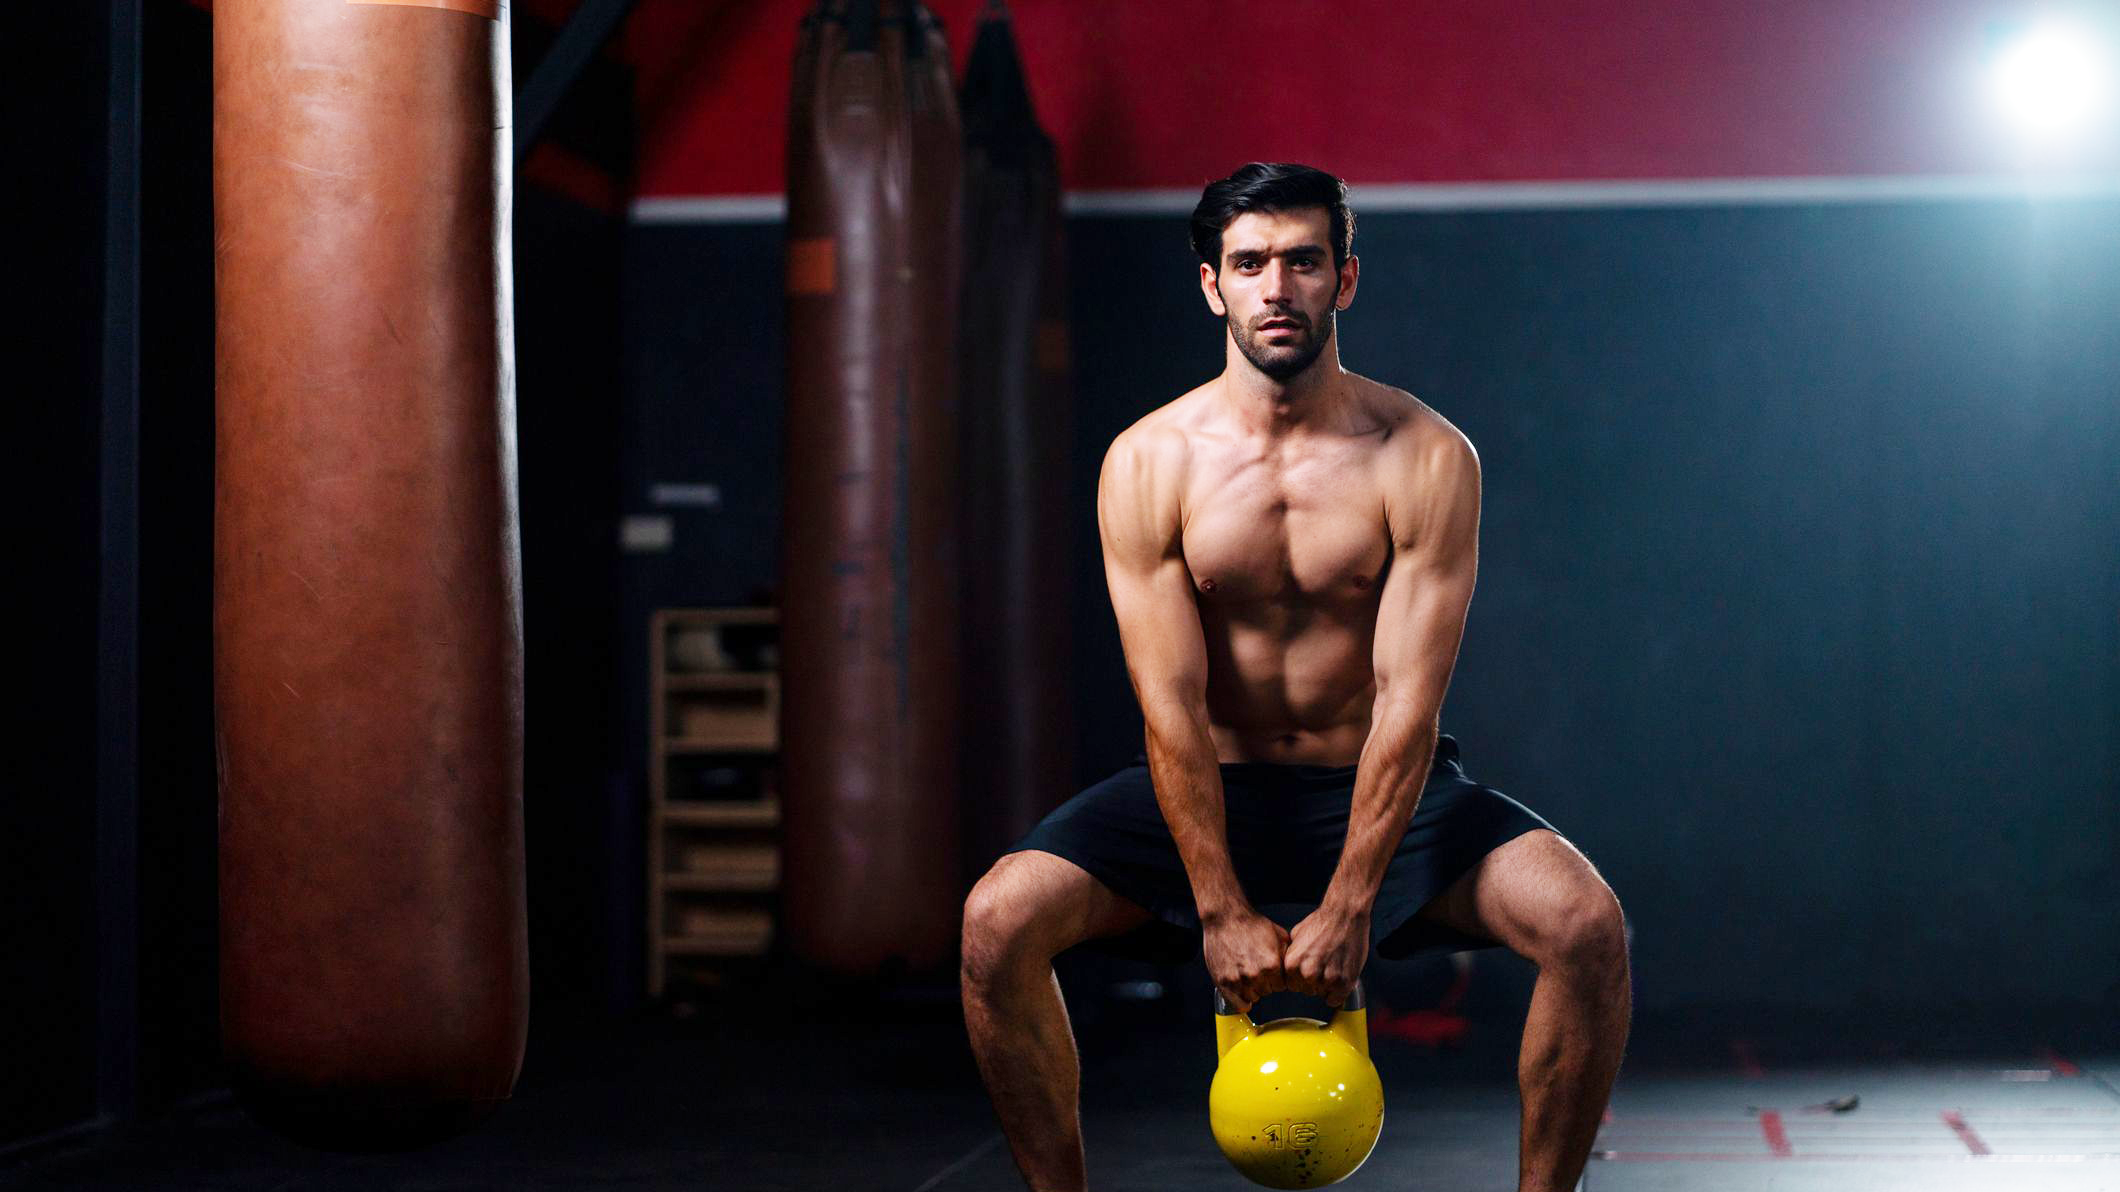 The  kettlebell that'll help you up your home workout gains